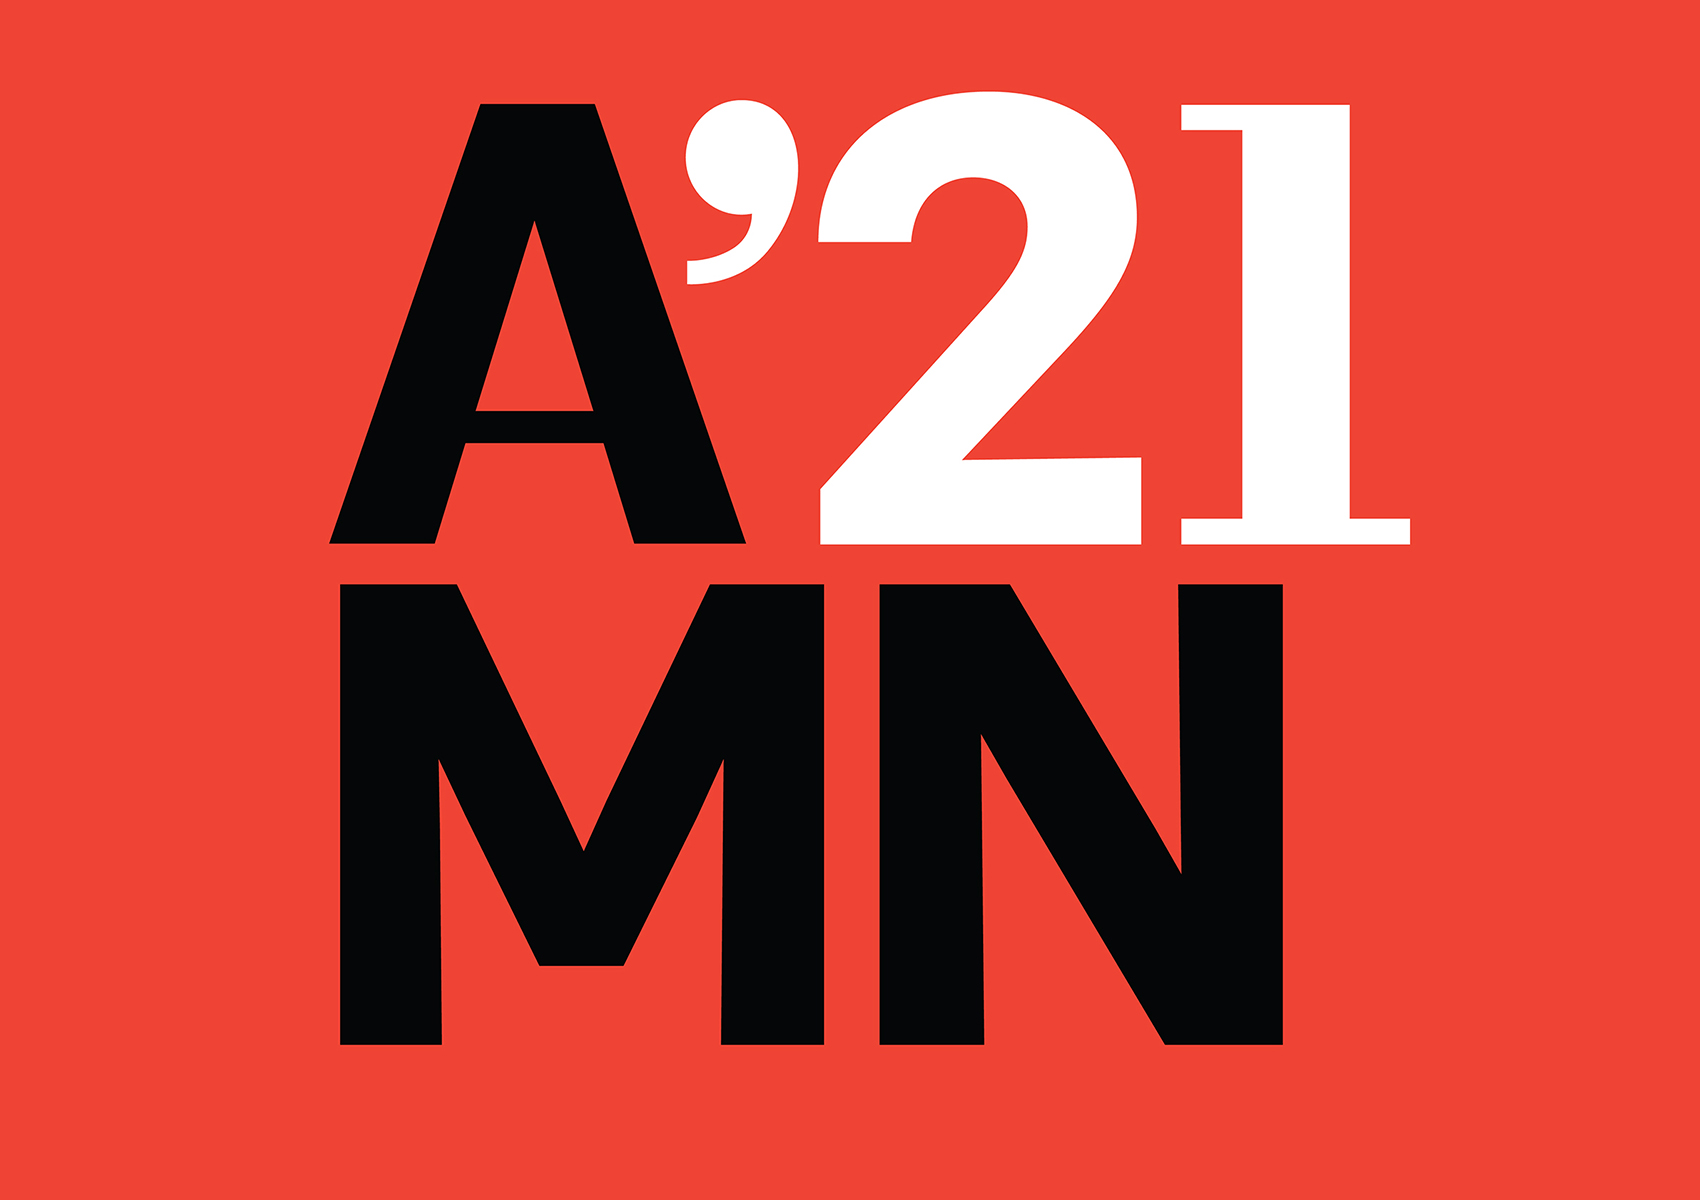 A’21 MN – The Minnesota Conference on Architecture: Day 1